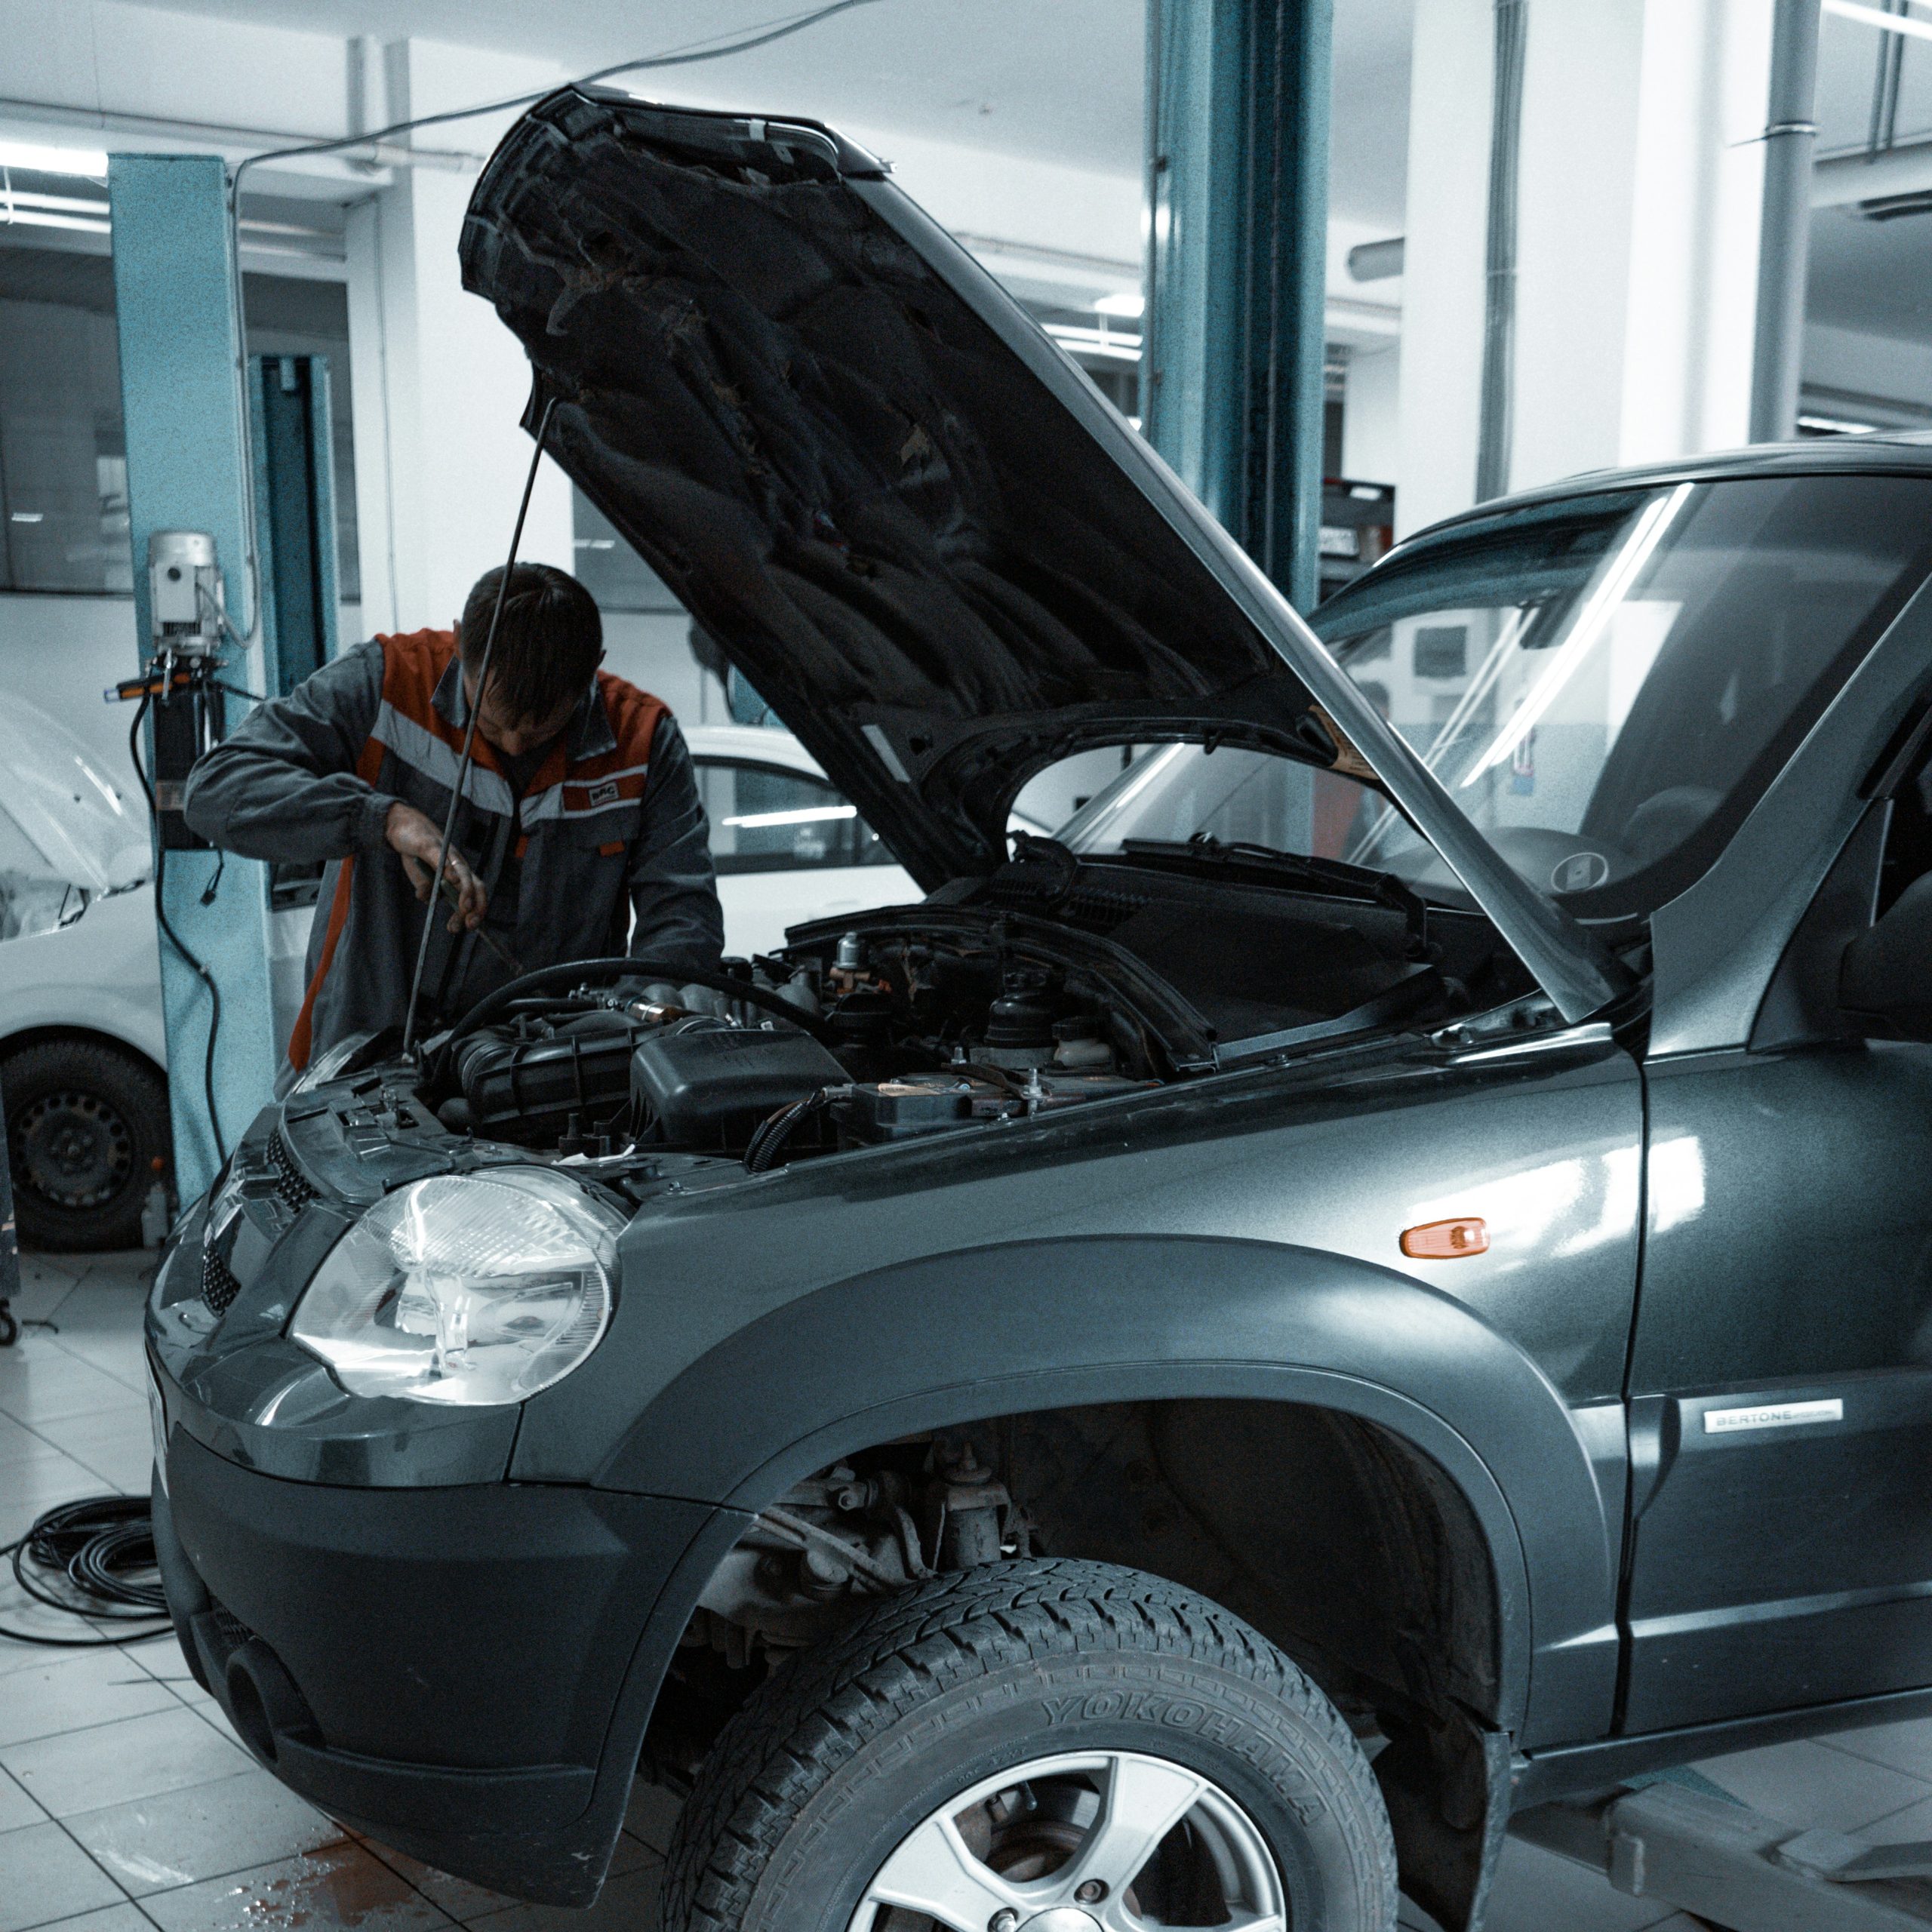 Worker doing car servicing on car with hood open